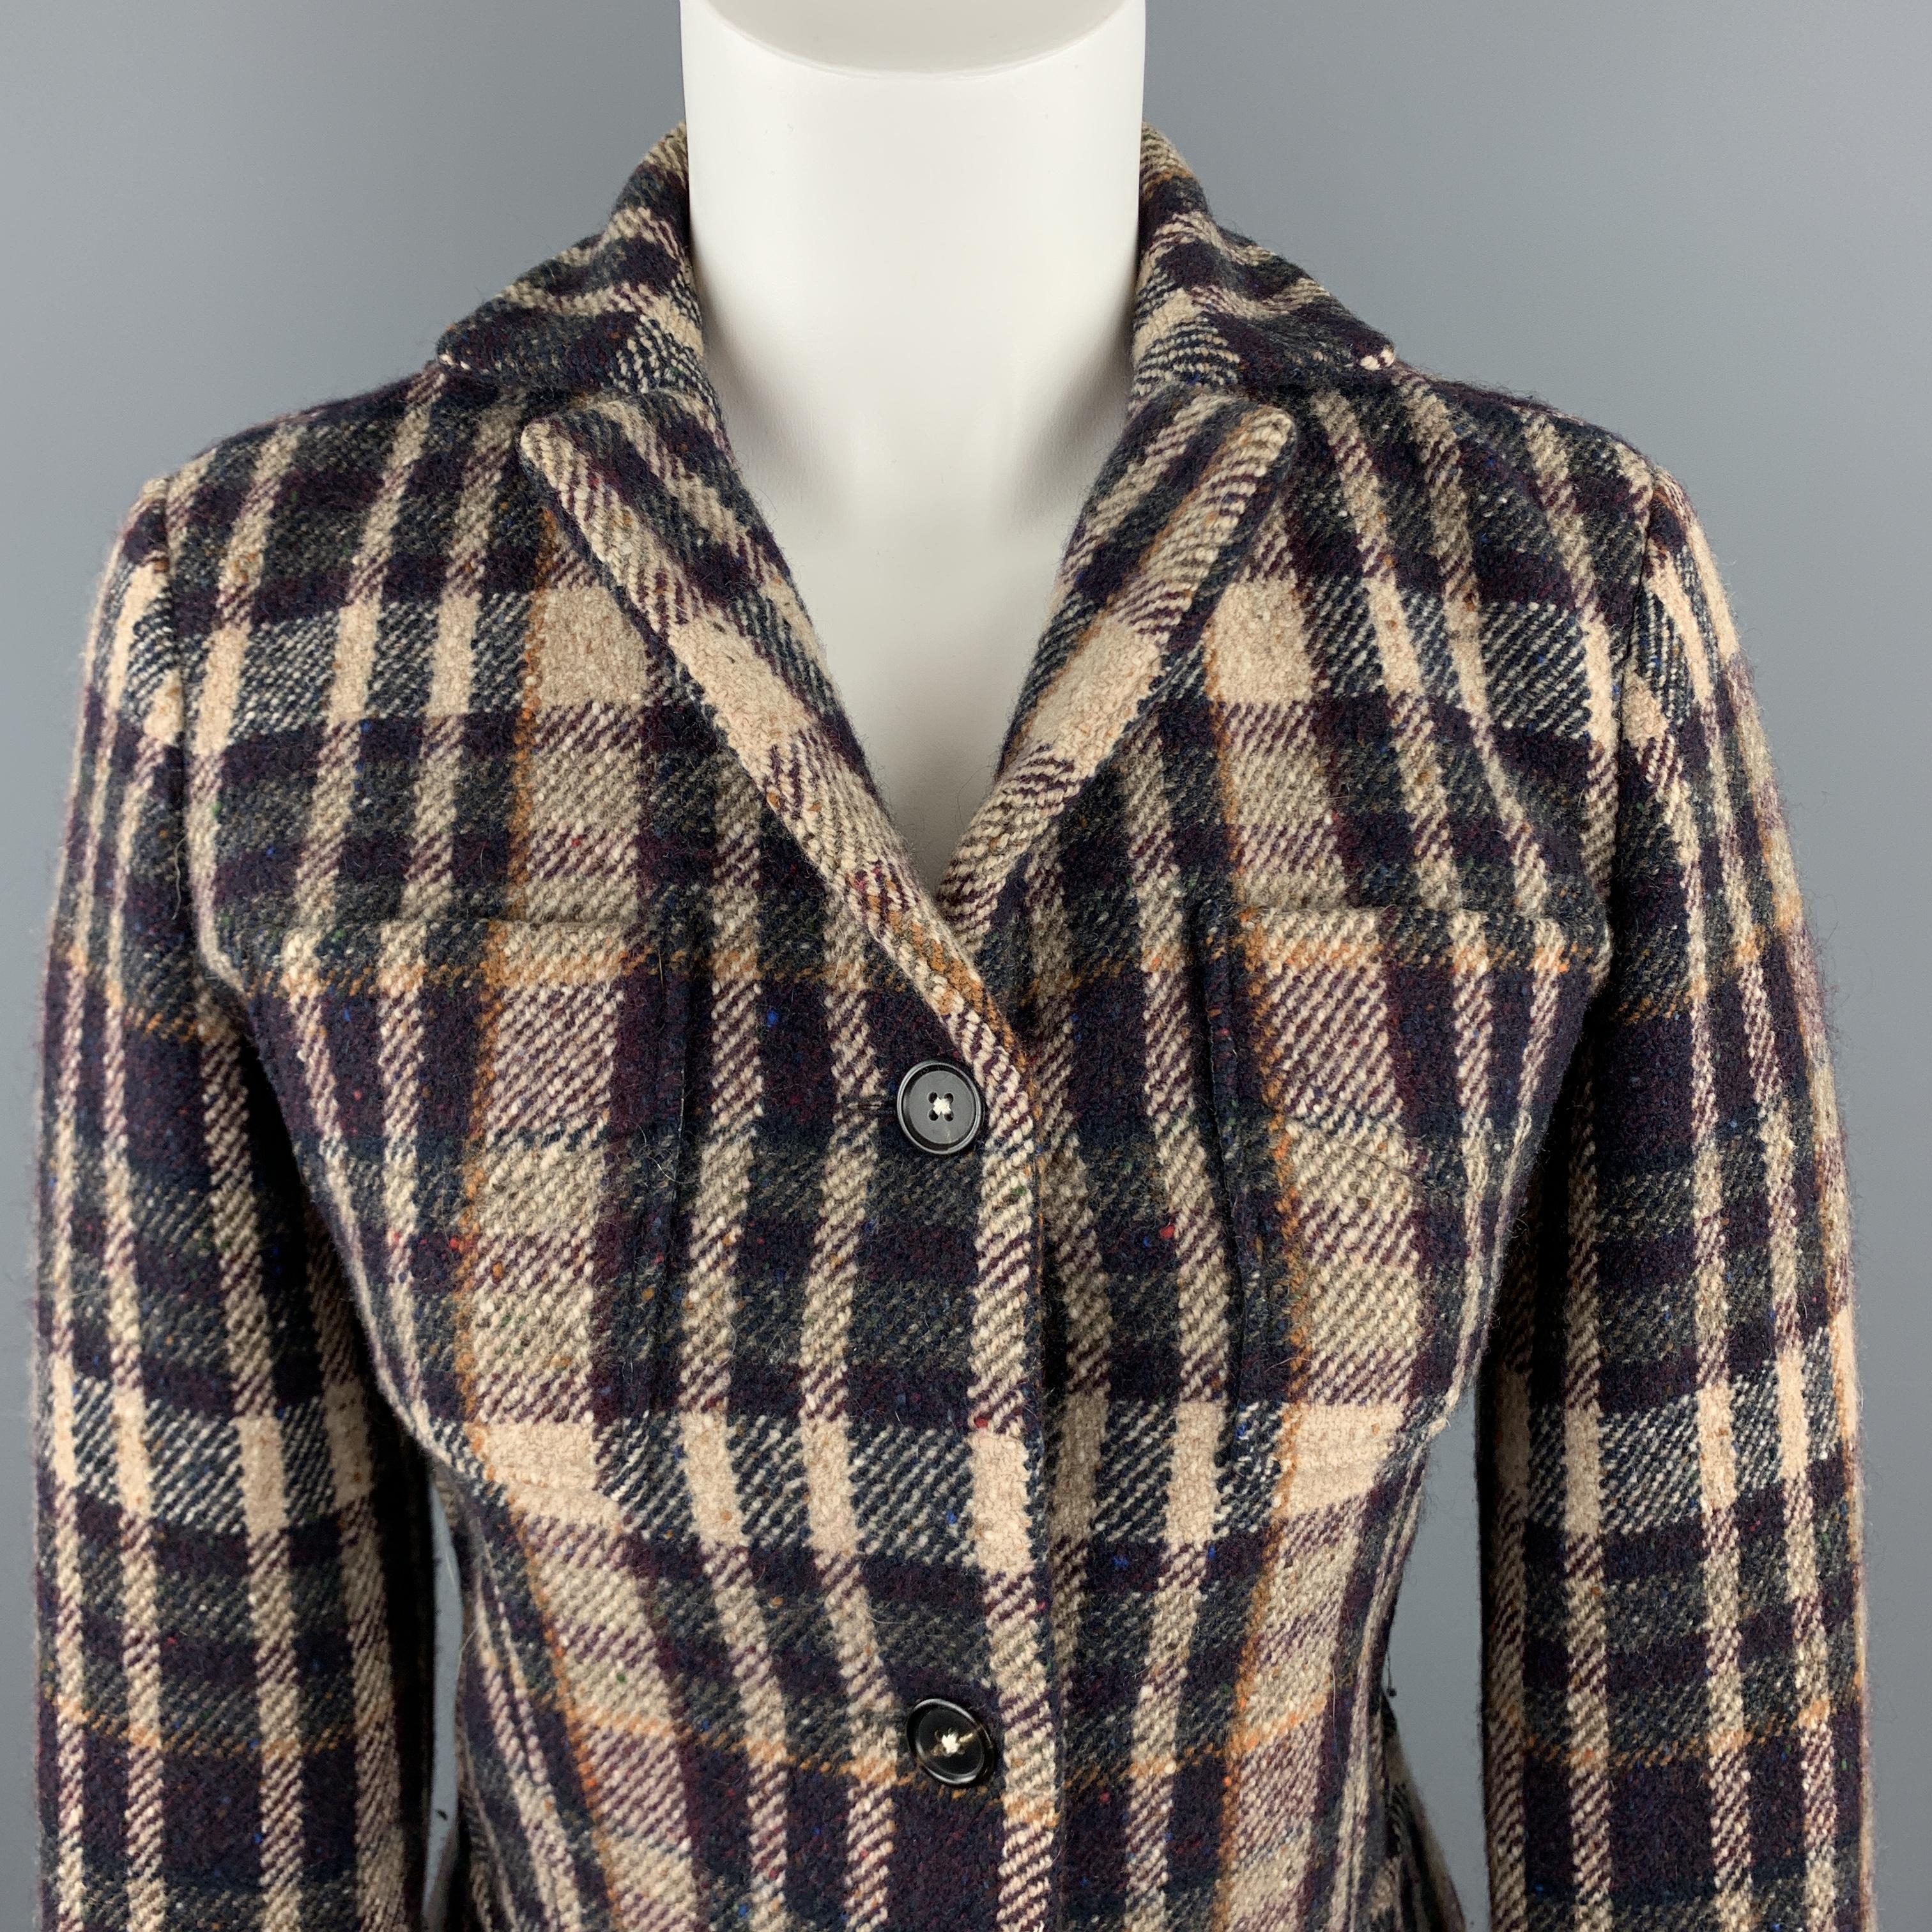 JIL SANDER cropped jacket comes in beige tweed with multi color plaid , button front, cuffed sleeves, and patch pockets. Made in Italy.

Very Good Pre-Owned Condition.
Marked: IT 36

Measurements:

Shoulder: 15 in.
Bust: 36 in.
Sleeve: 22